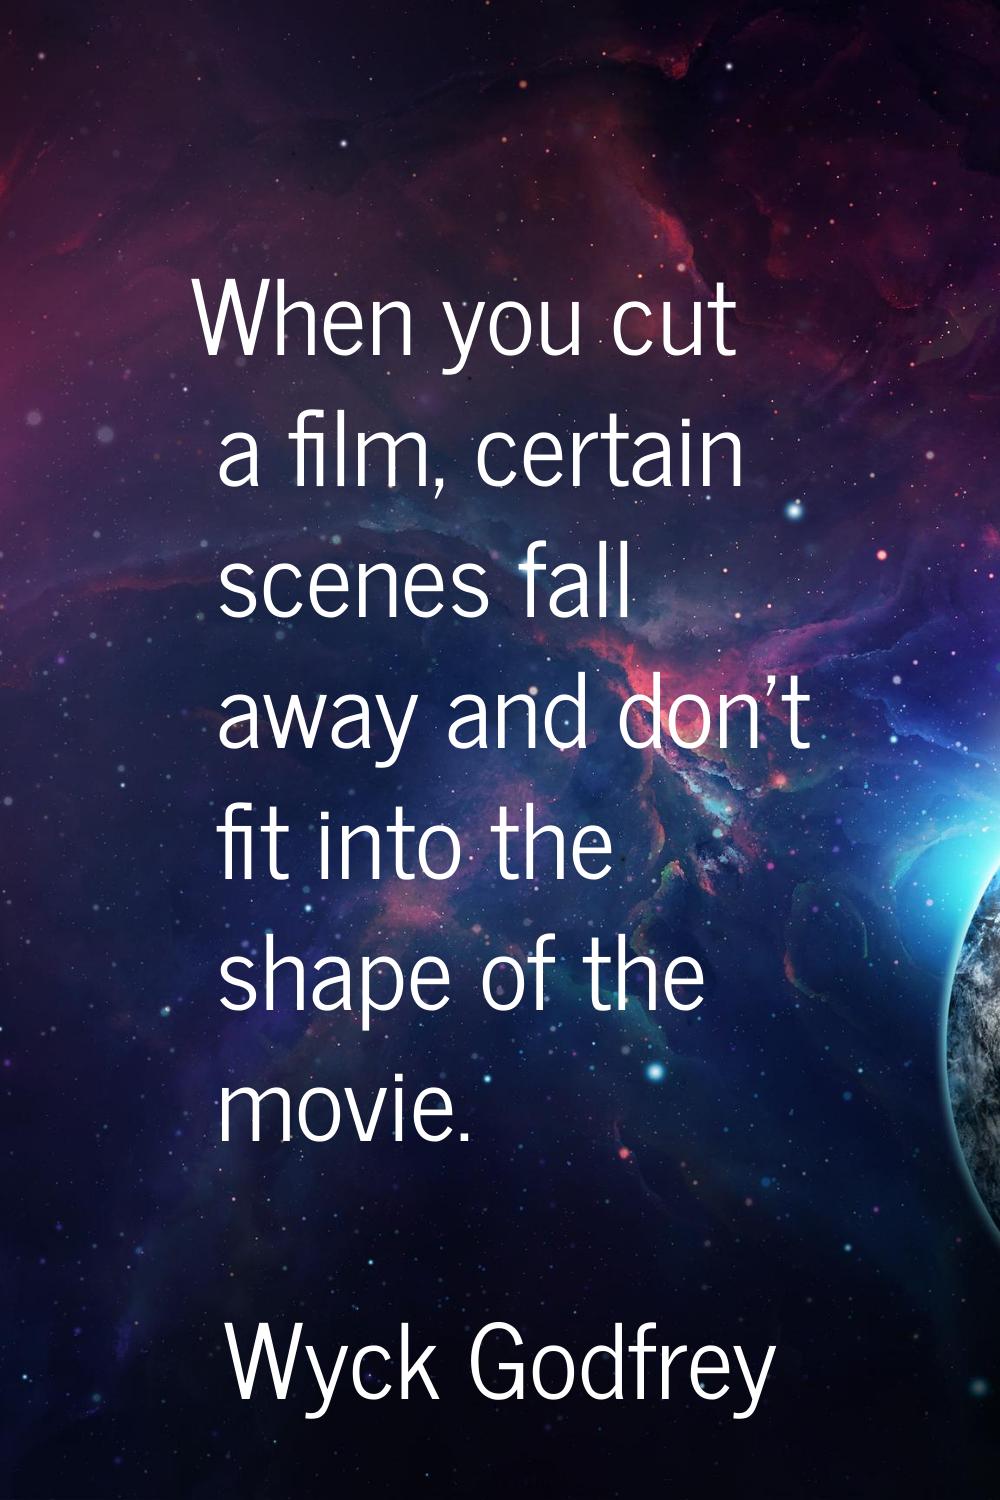 When you cut a film, certain scenes fall away and don't fit into the shape of the movie.